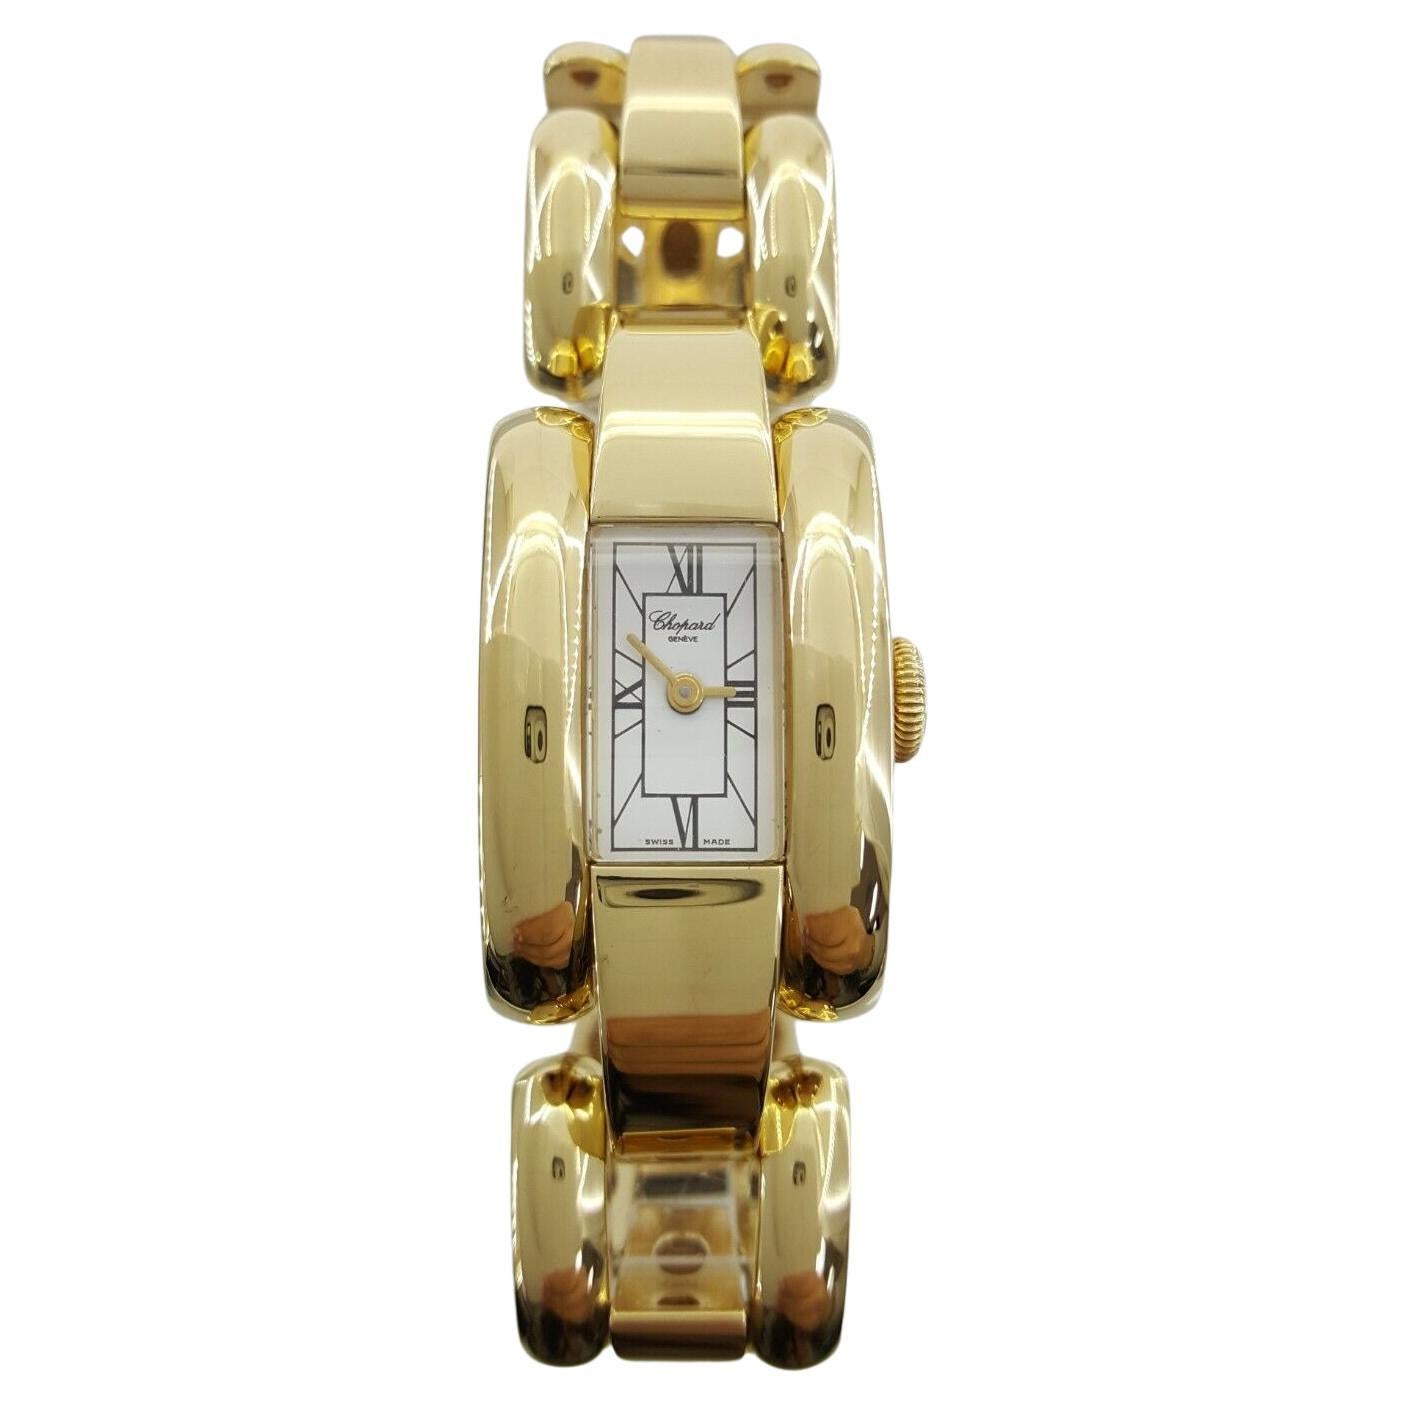 Chopard Watch Crafted in luxurious 18K gold